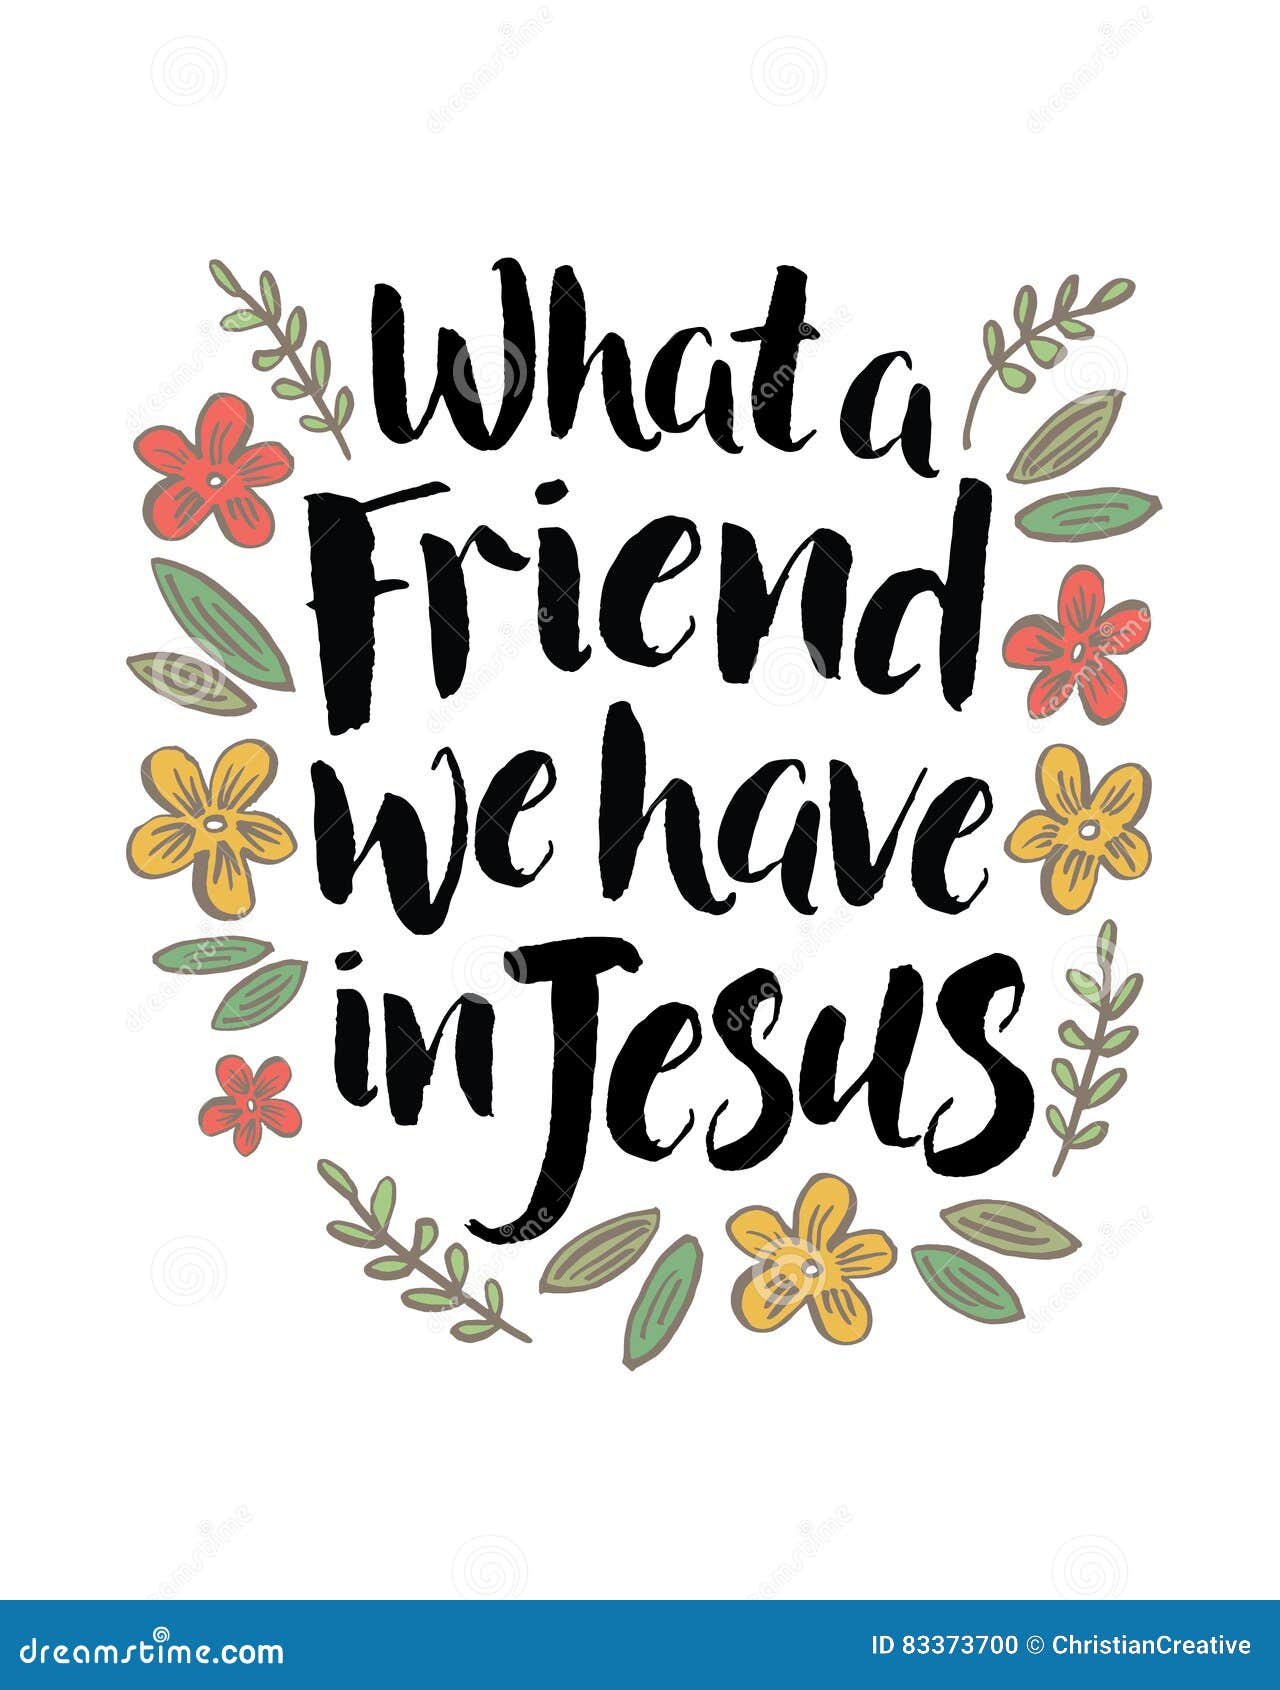 what a friend we have in jesus